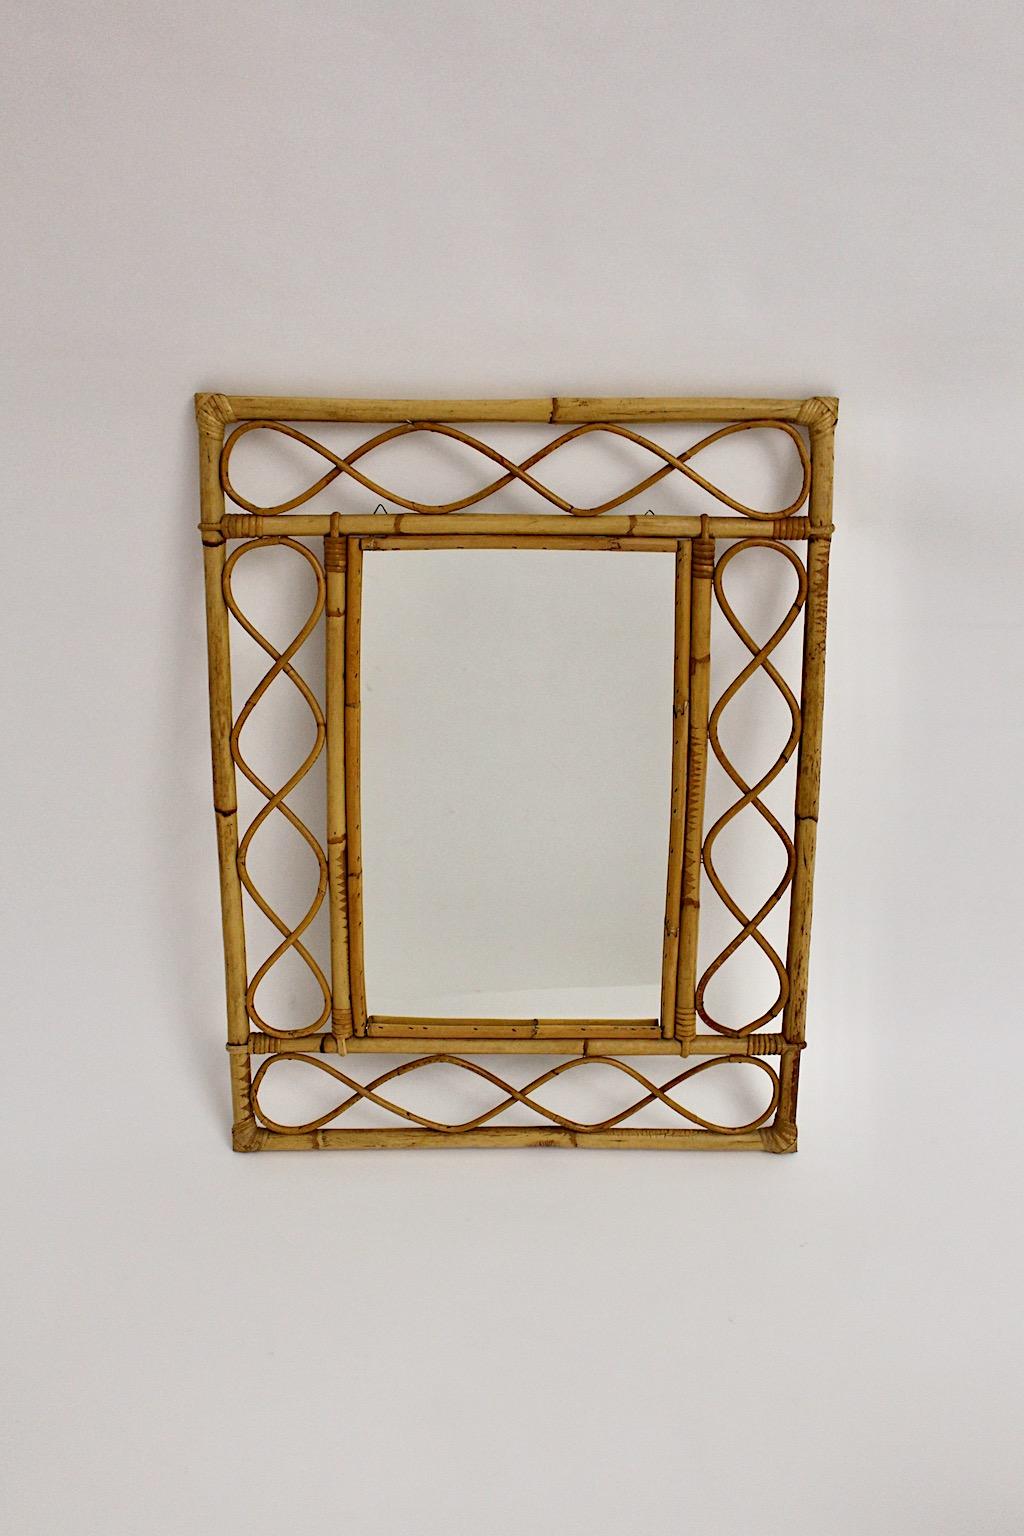 Riviera style organic modern vintage wall mirror or trumeau mirror from rattan / bamboo and mirror glass 1970s France.
Slightly curved loops between bamboo sticks and mirror glass form a lovely wall mirror or trumeau mirror.
The rattan wall